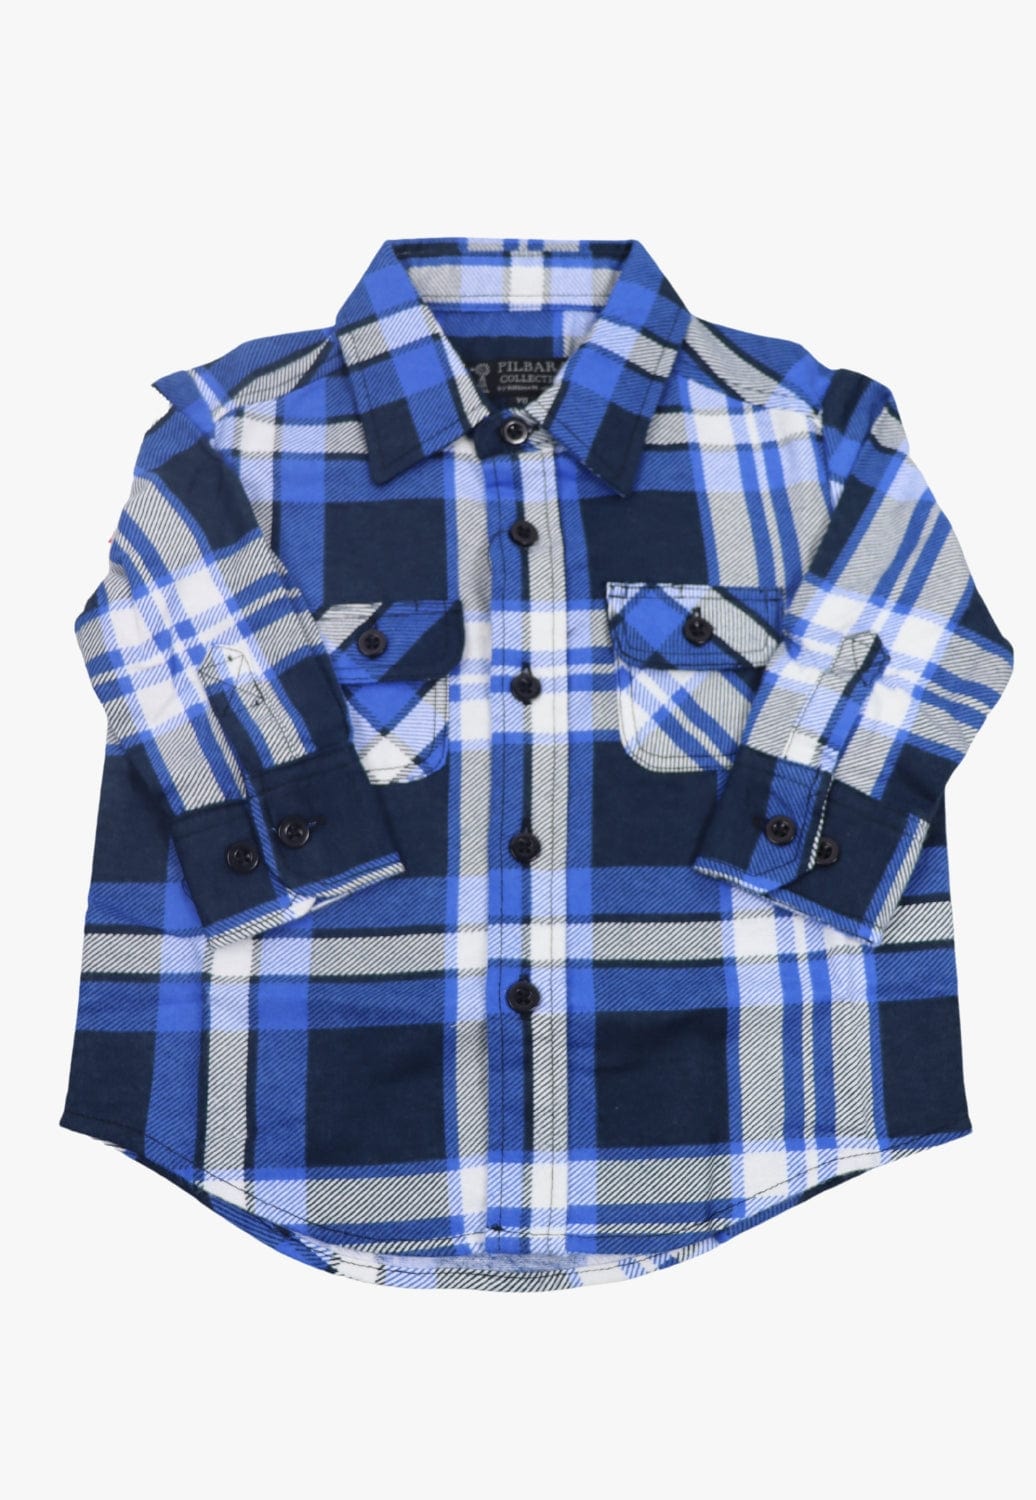 Ritemate CLOTHING-Kids Unisex Shirts Ritemate Kids Open Front Flannelette Shirt